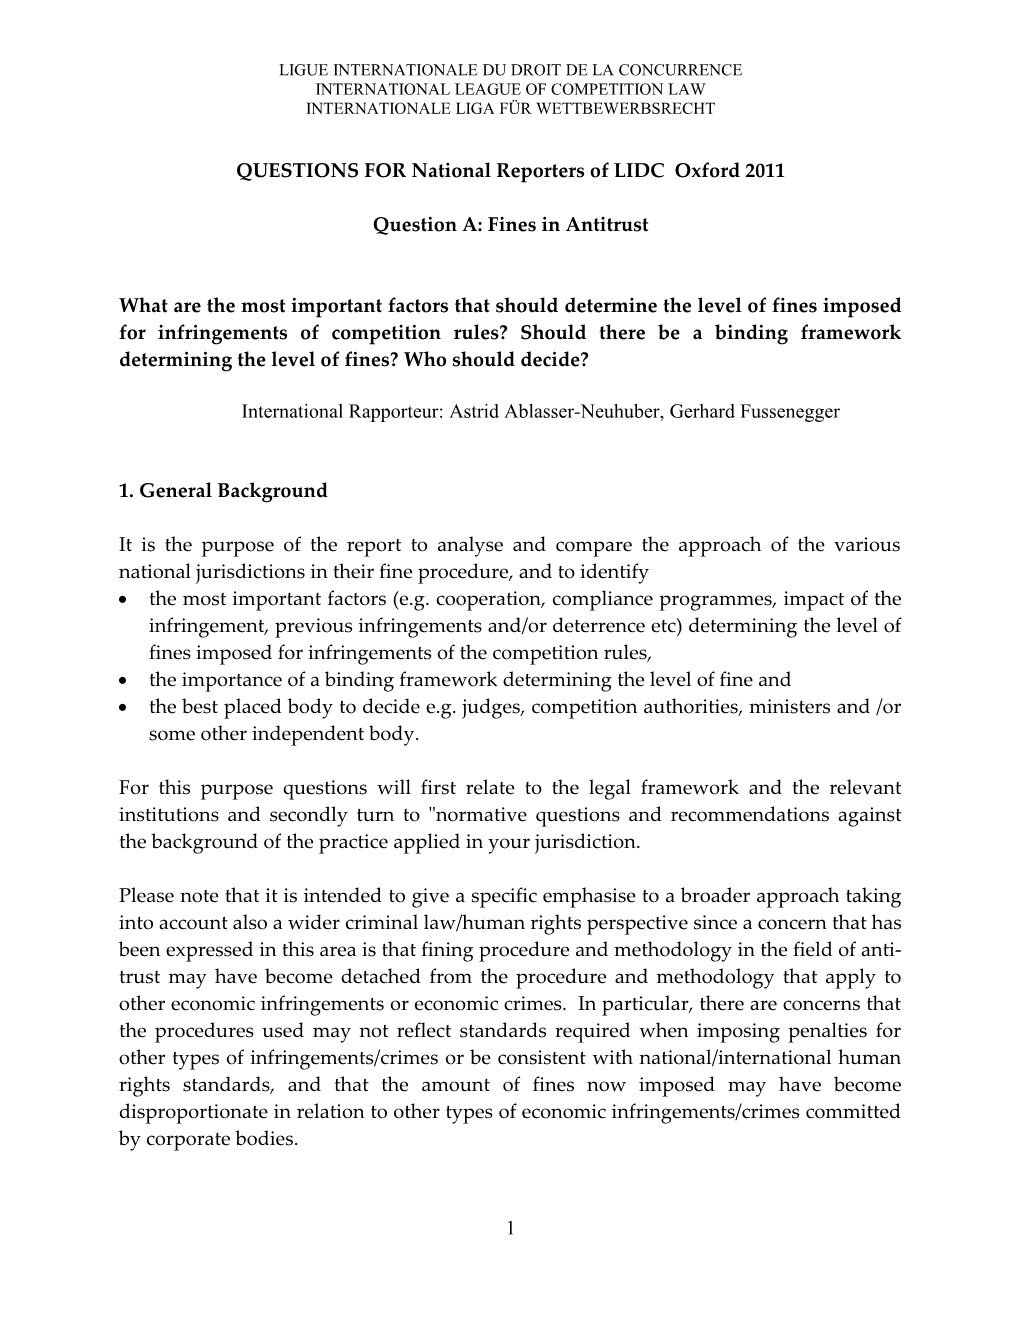 Questions for the International Reporter 2011 Question a (Fines)